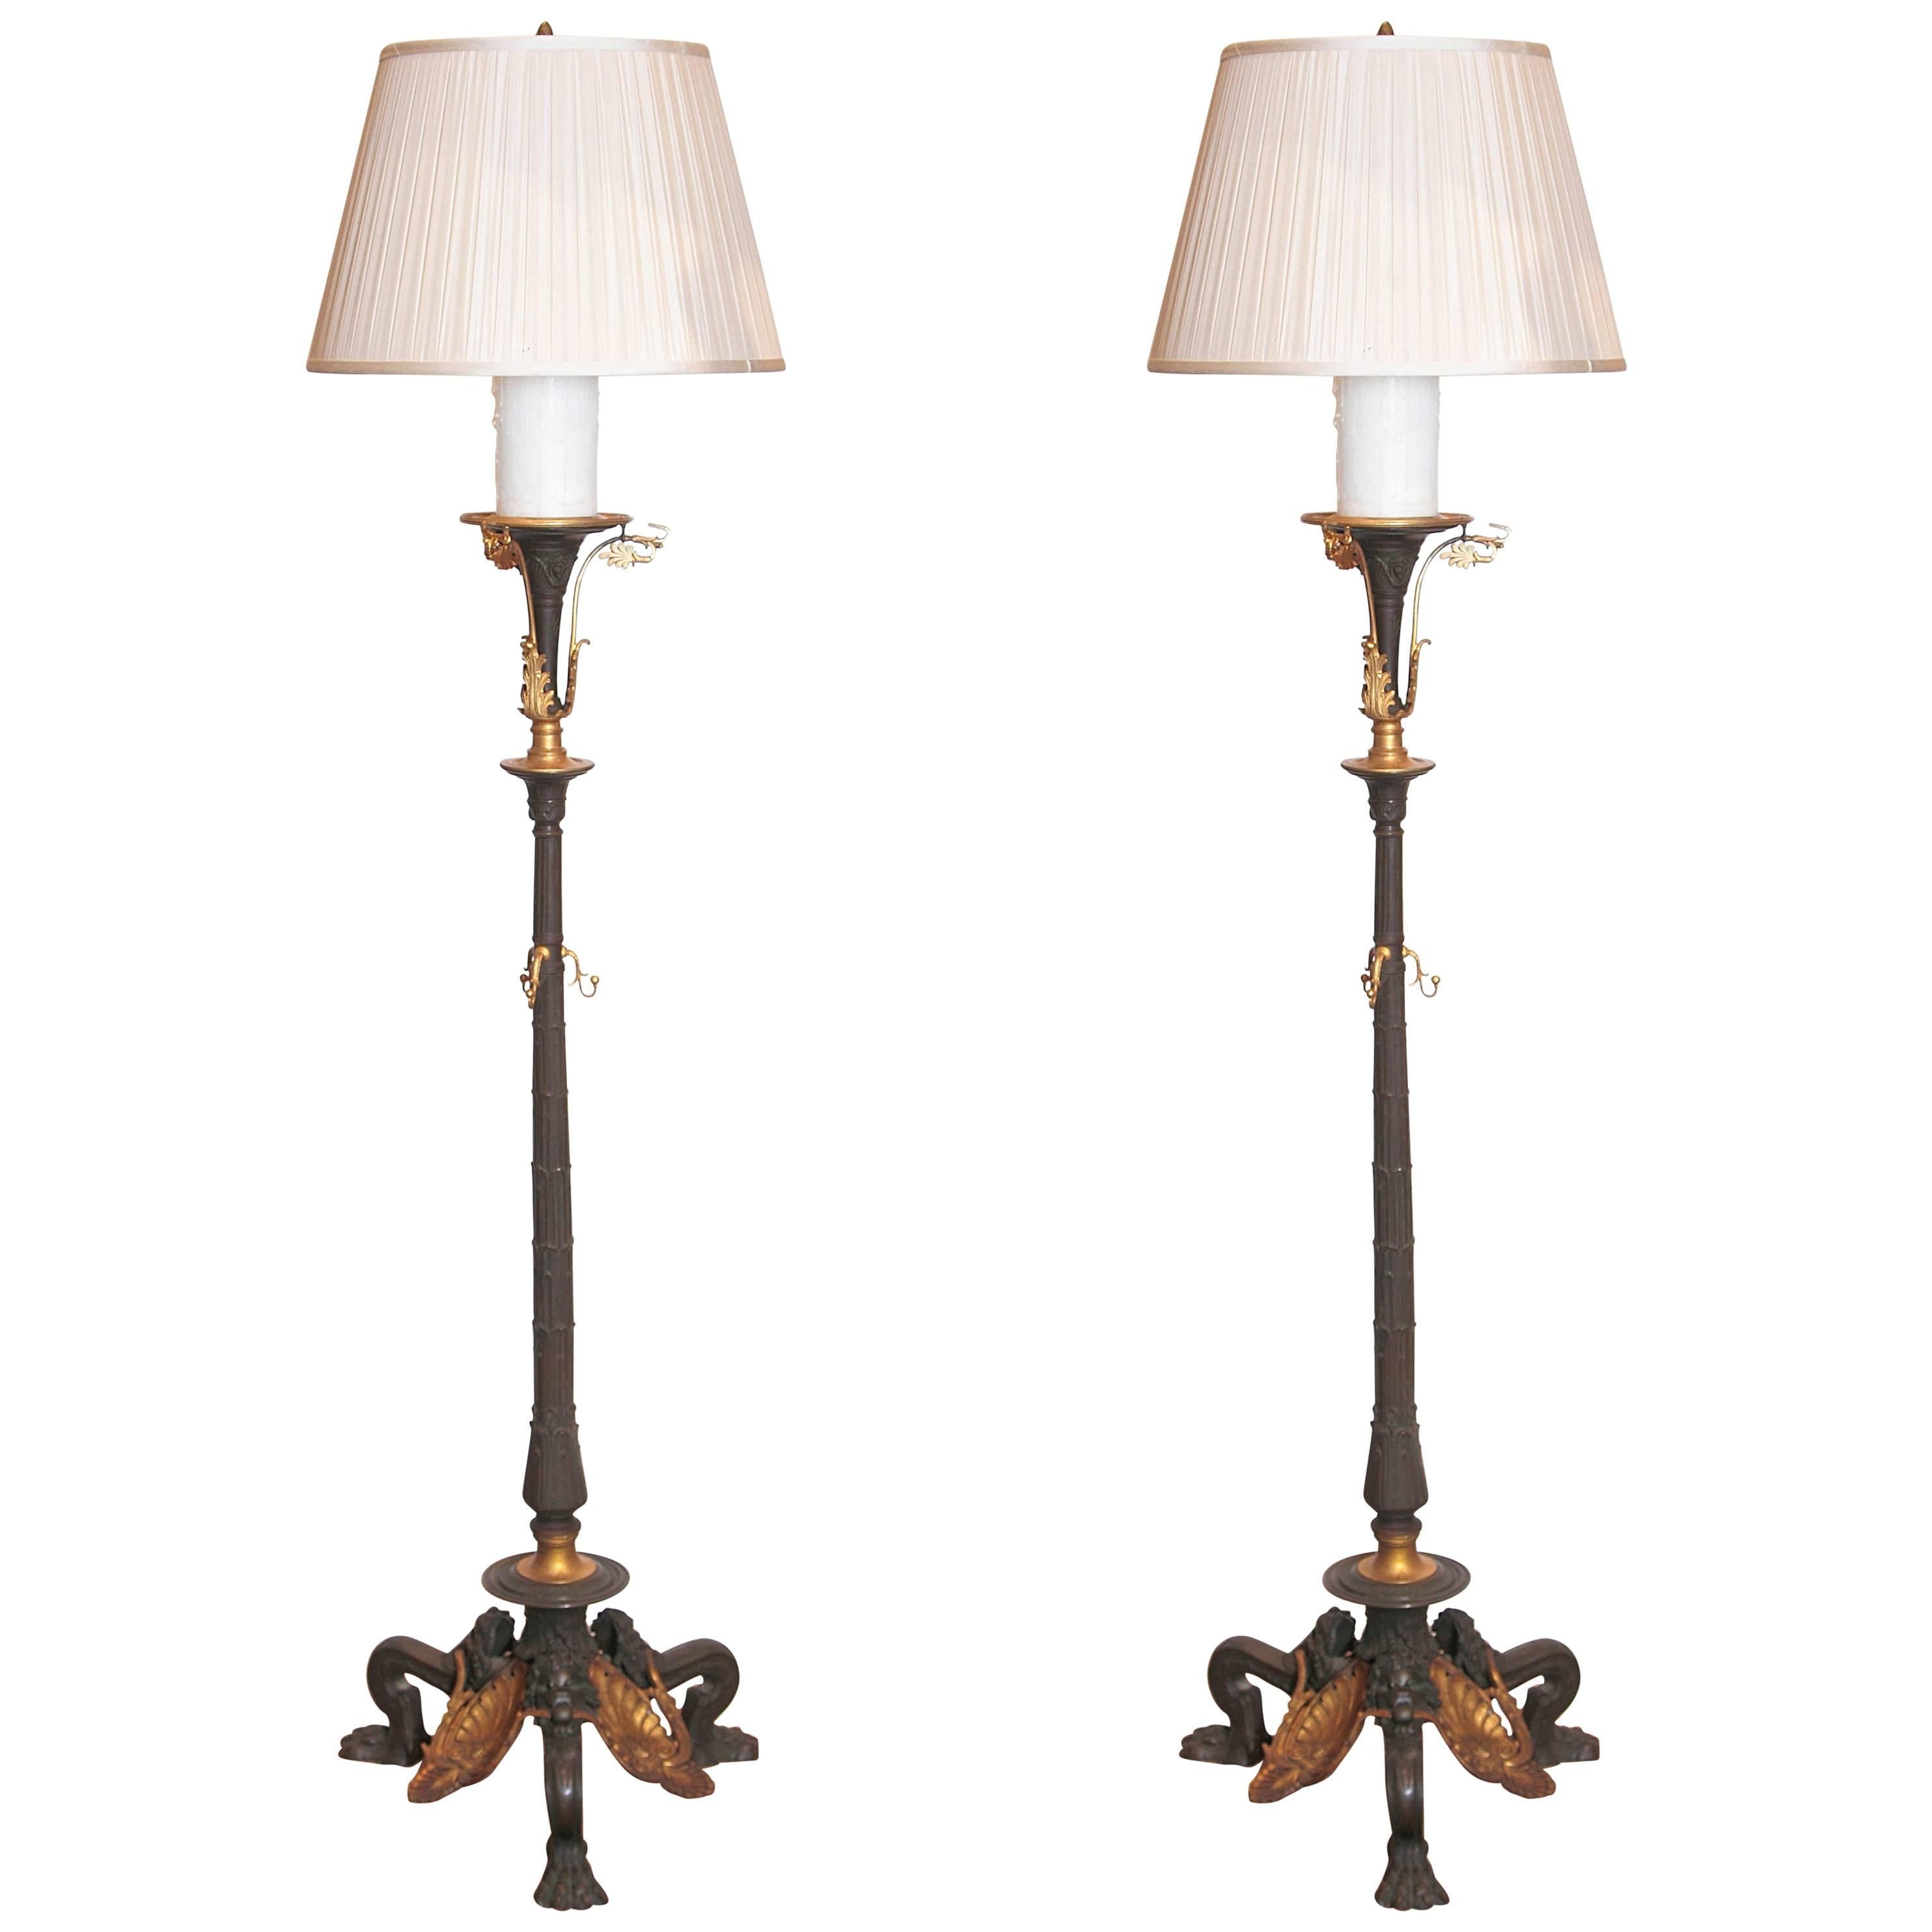 Pair of 19th Century Continental Bronze and Gilt Bronze Torchiere Floor Lamps